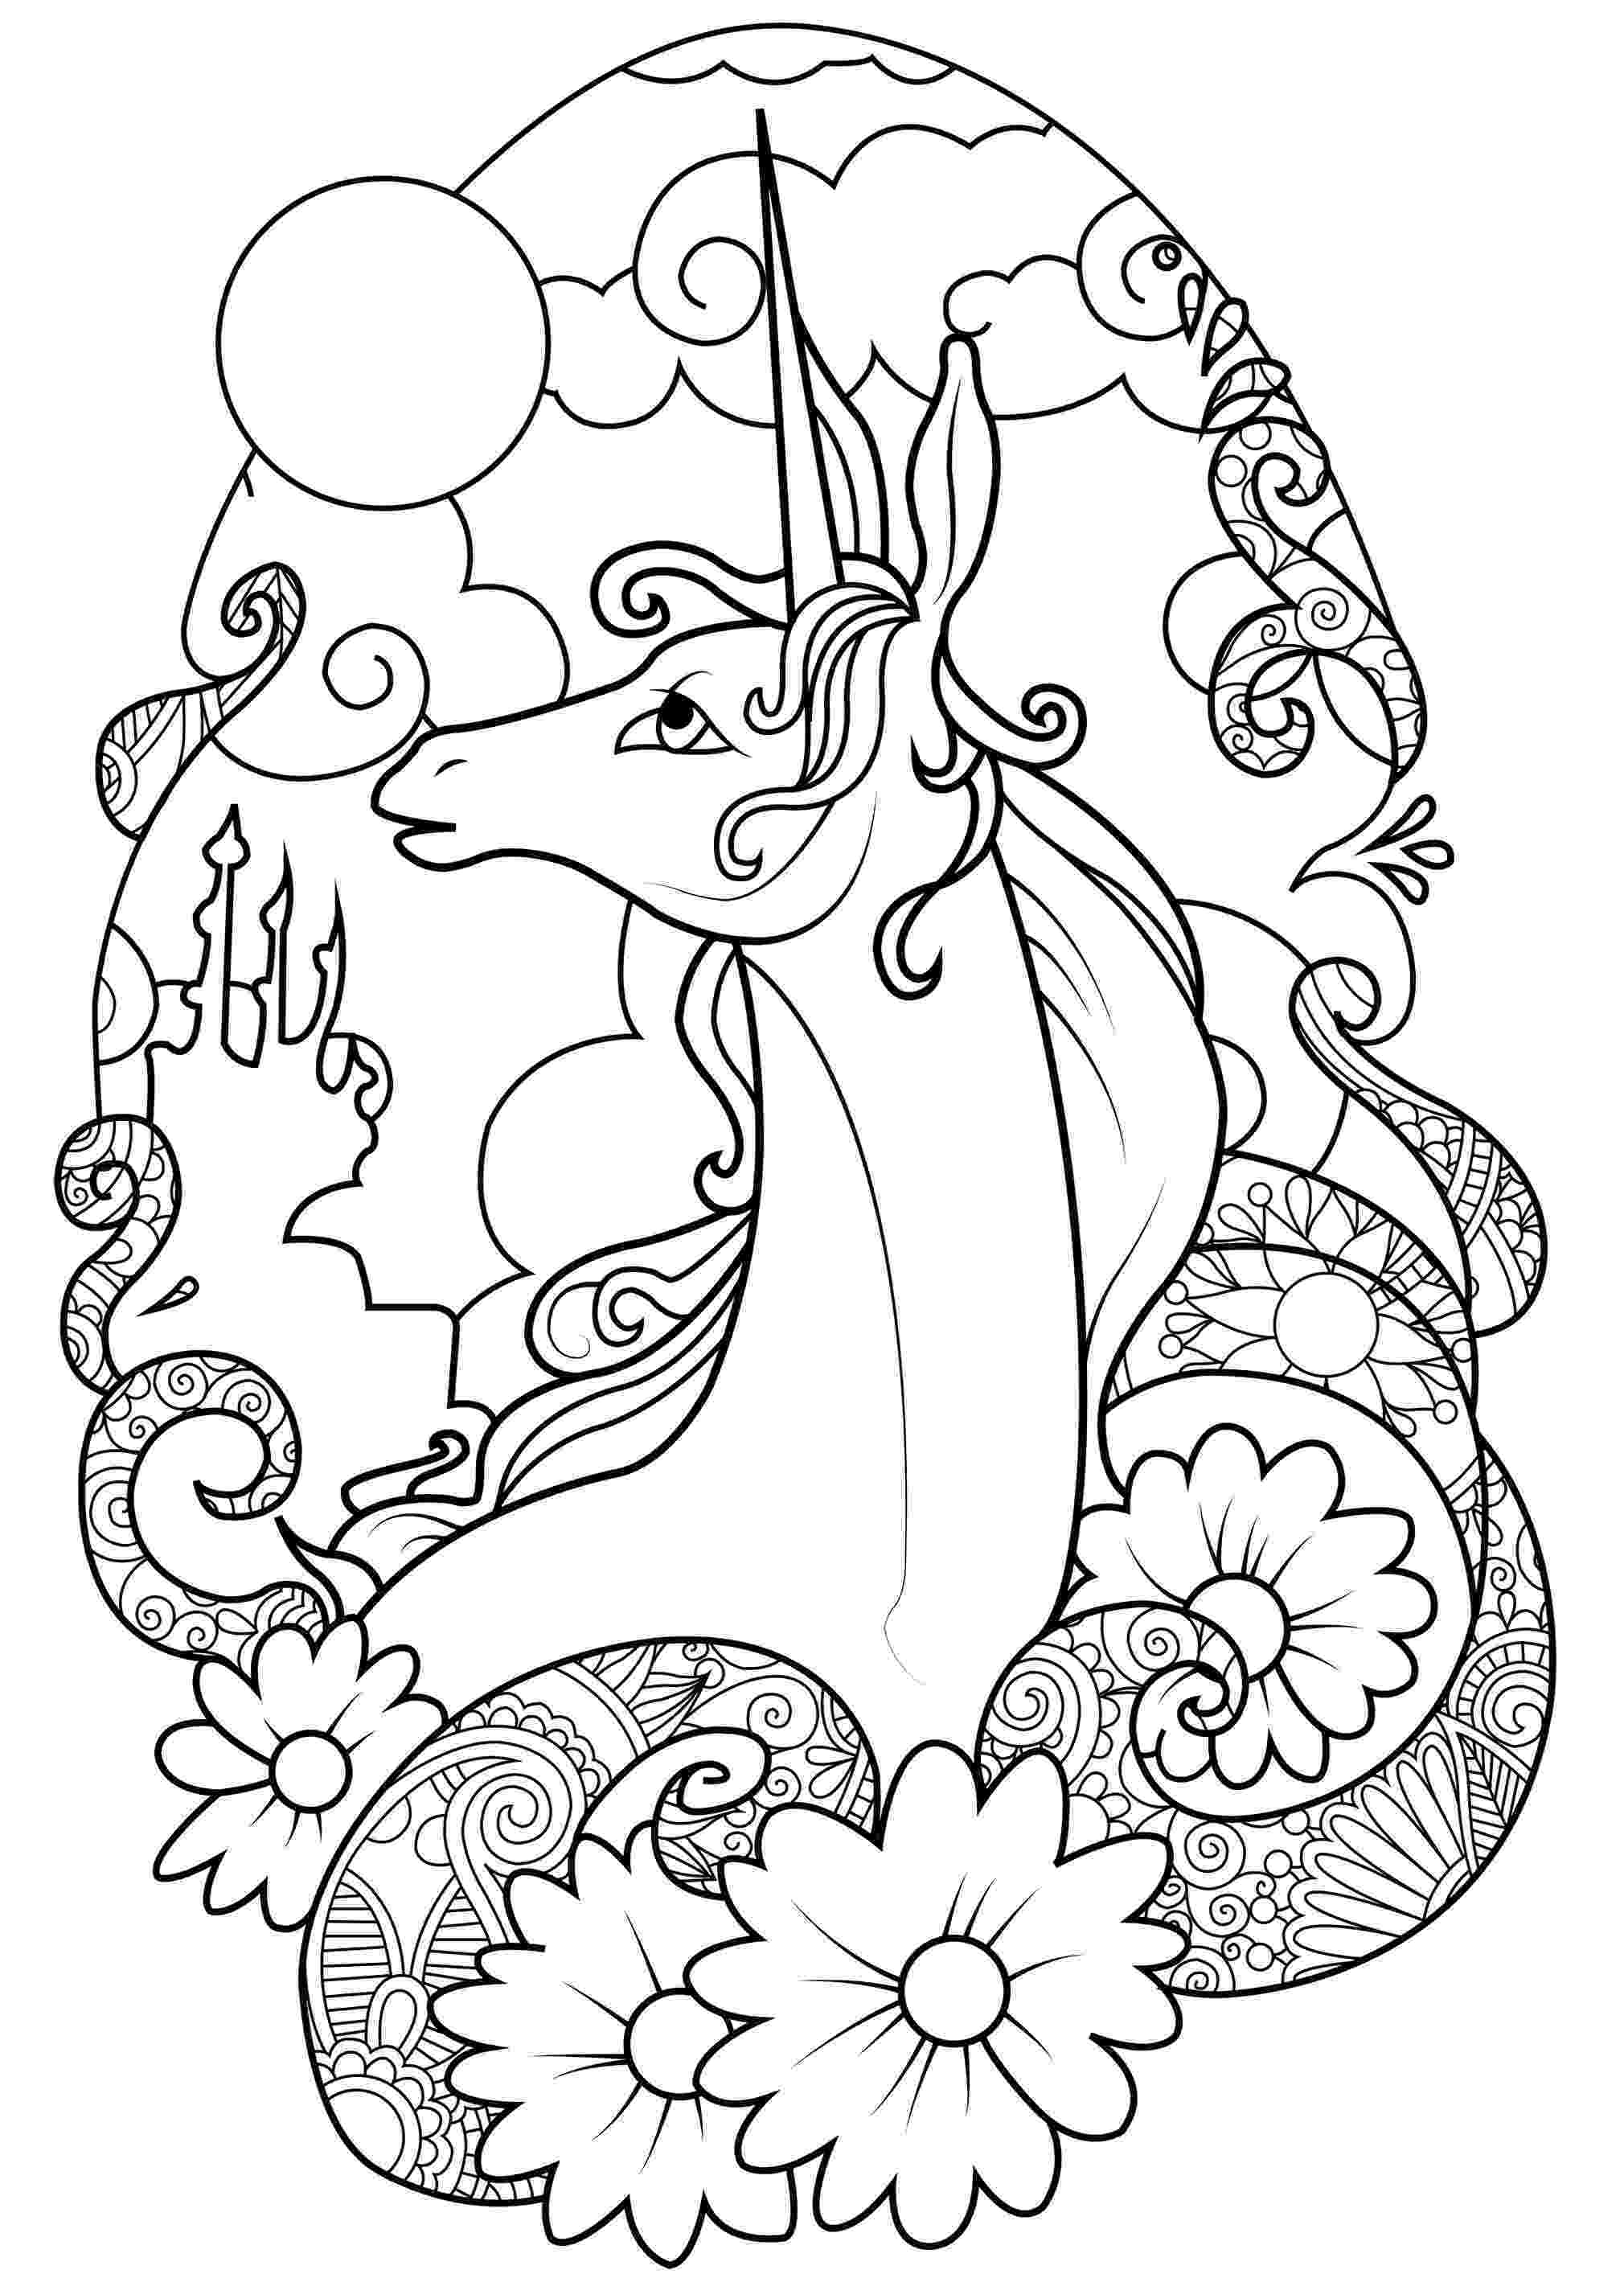 unicorn coloring pages printable fairy unicorn unicorns adult coloring pages printable coloring unicorn pages 